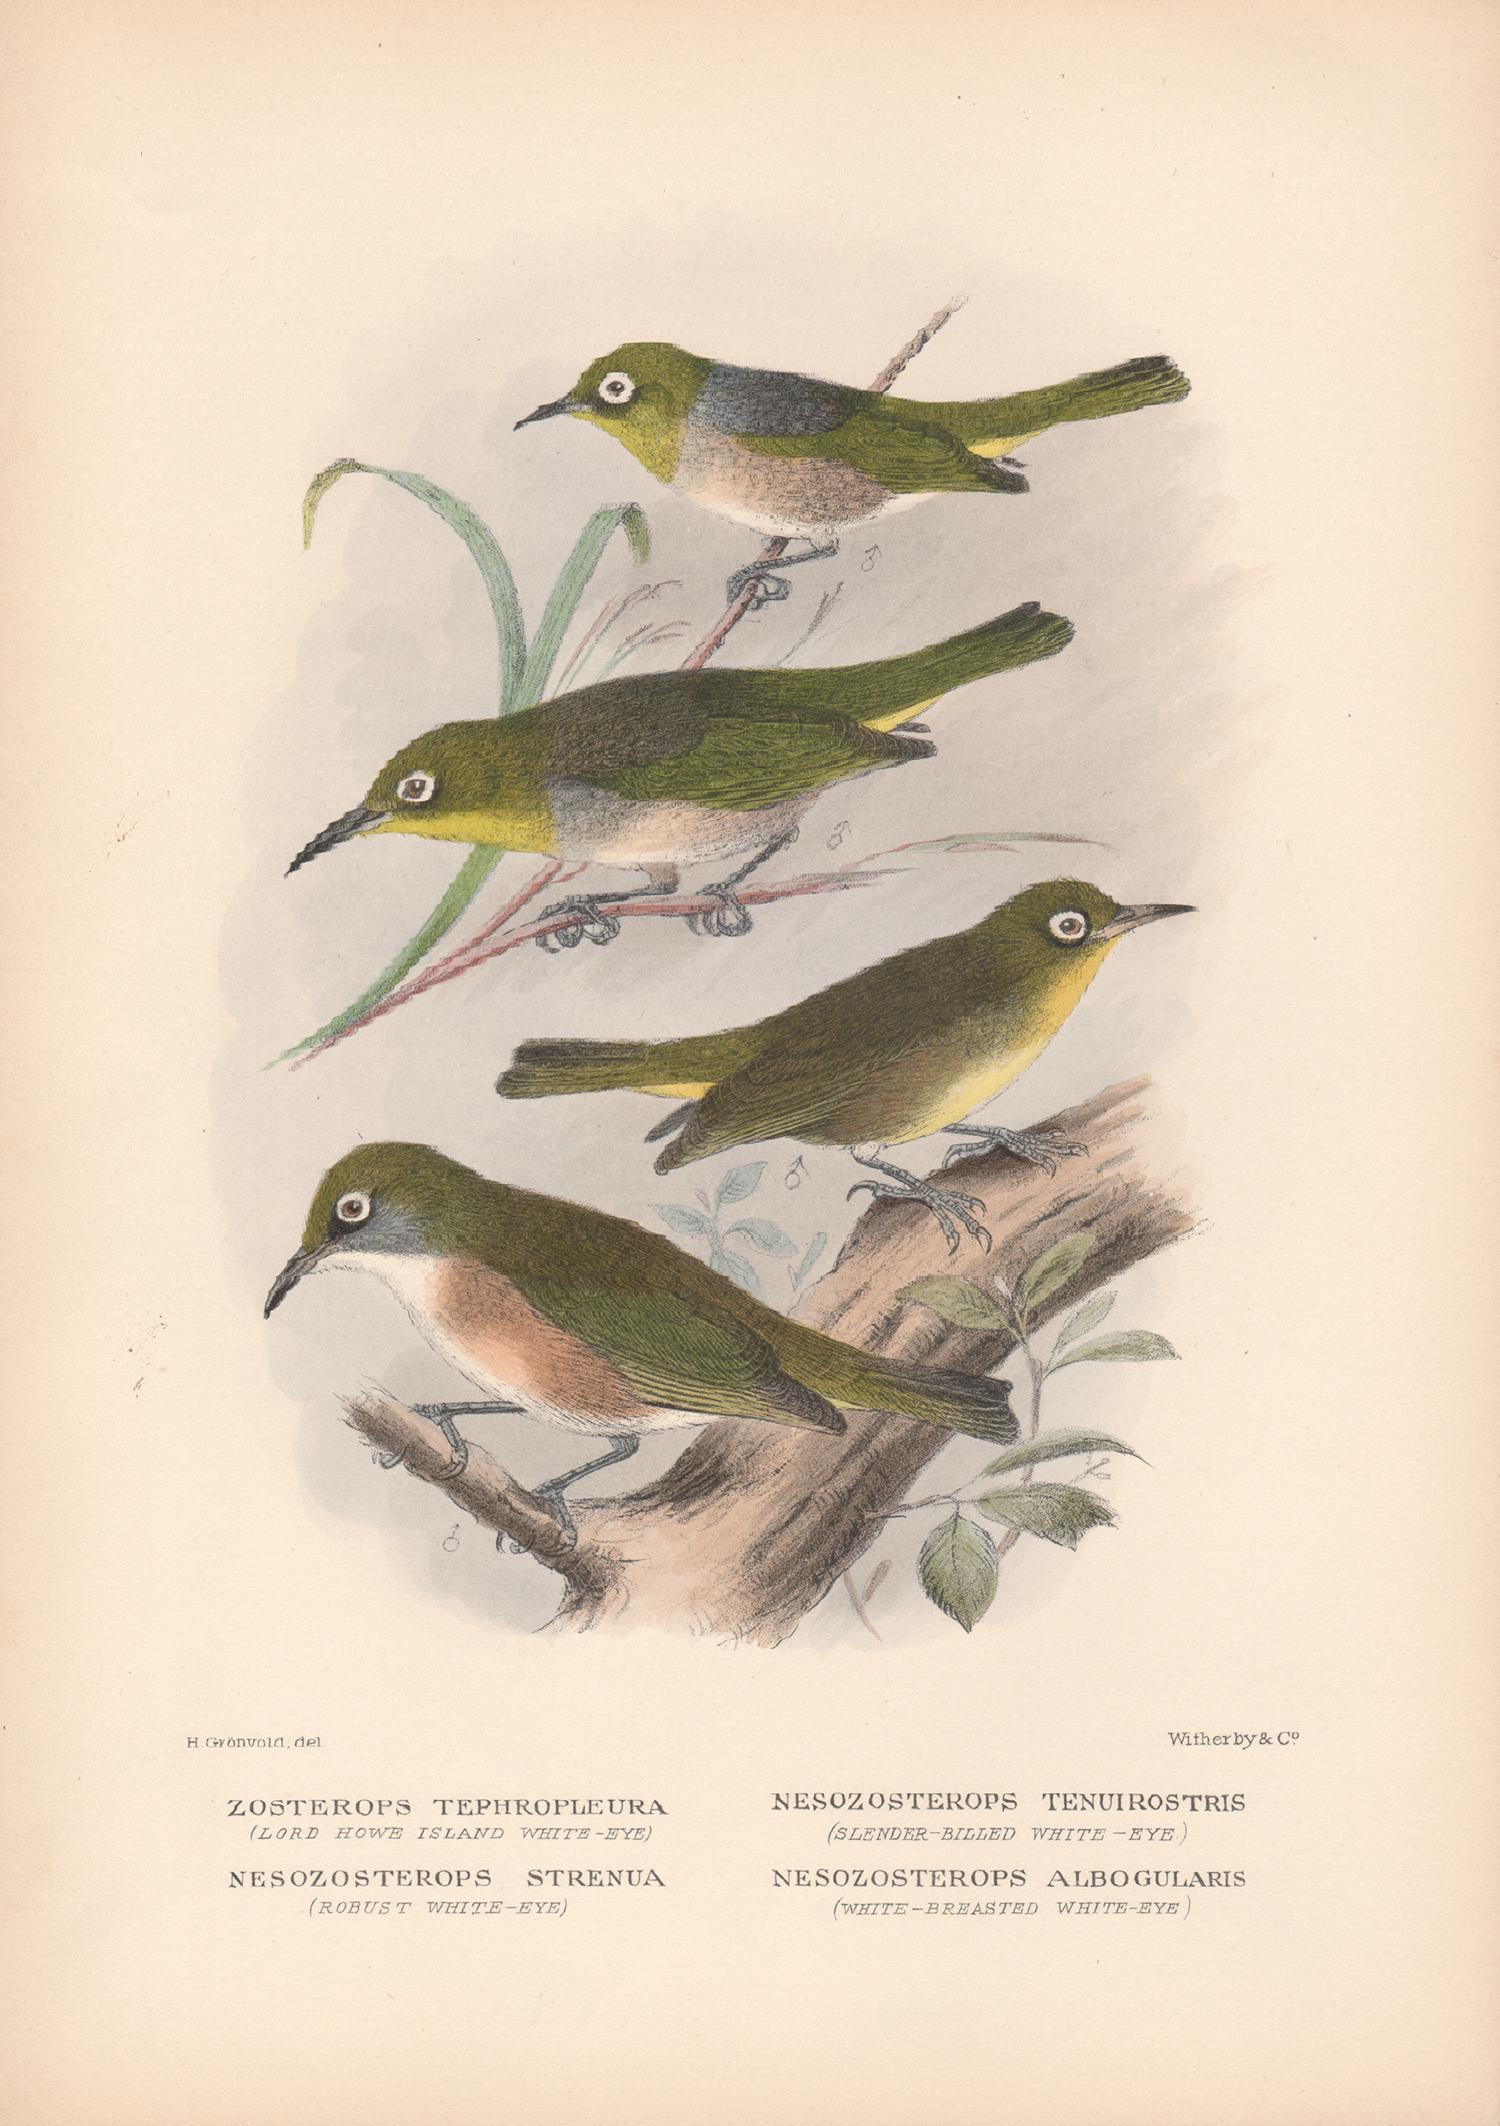 After Henrik Gronvold Animal Print - Lord Howe Island White-Eye and others, Bird lithograph with hand-colouring, 1928